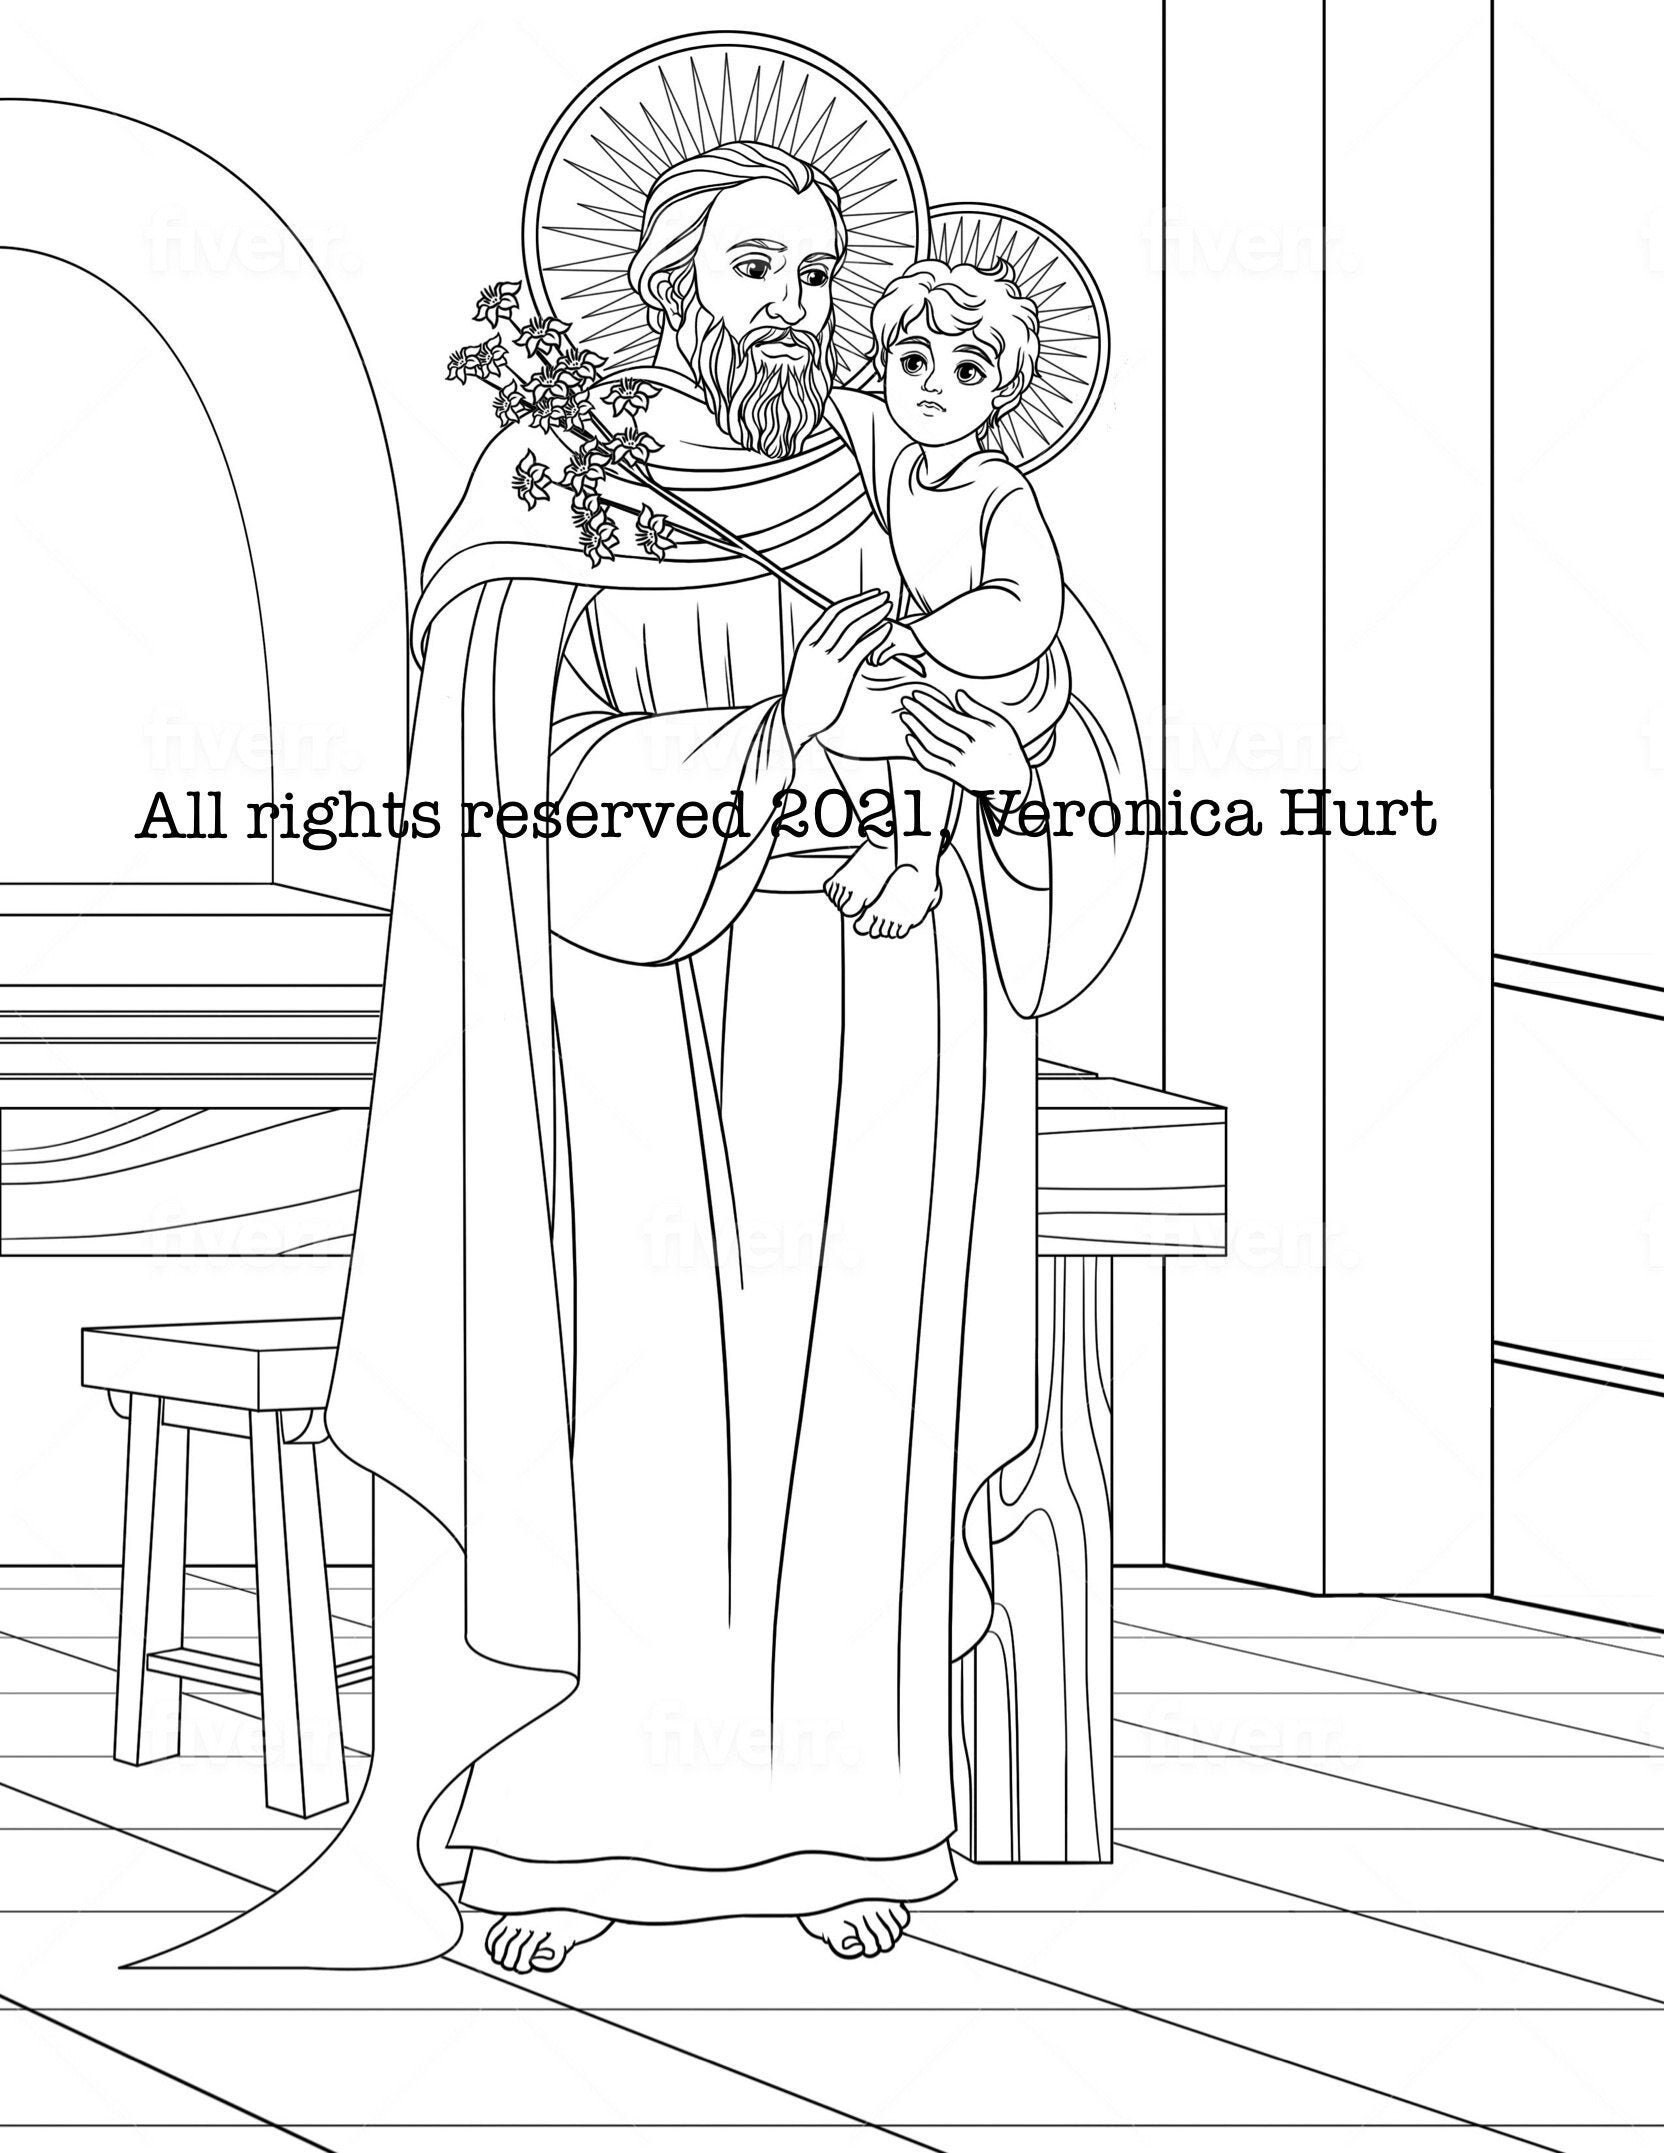 St Joseph Coloring Page for Kids 6 and Adults Featuring St | Etsy